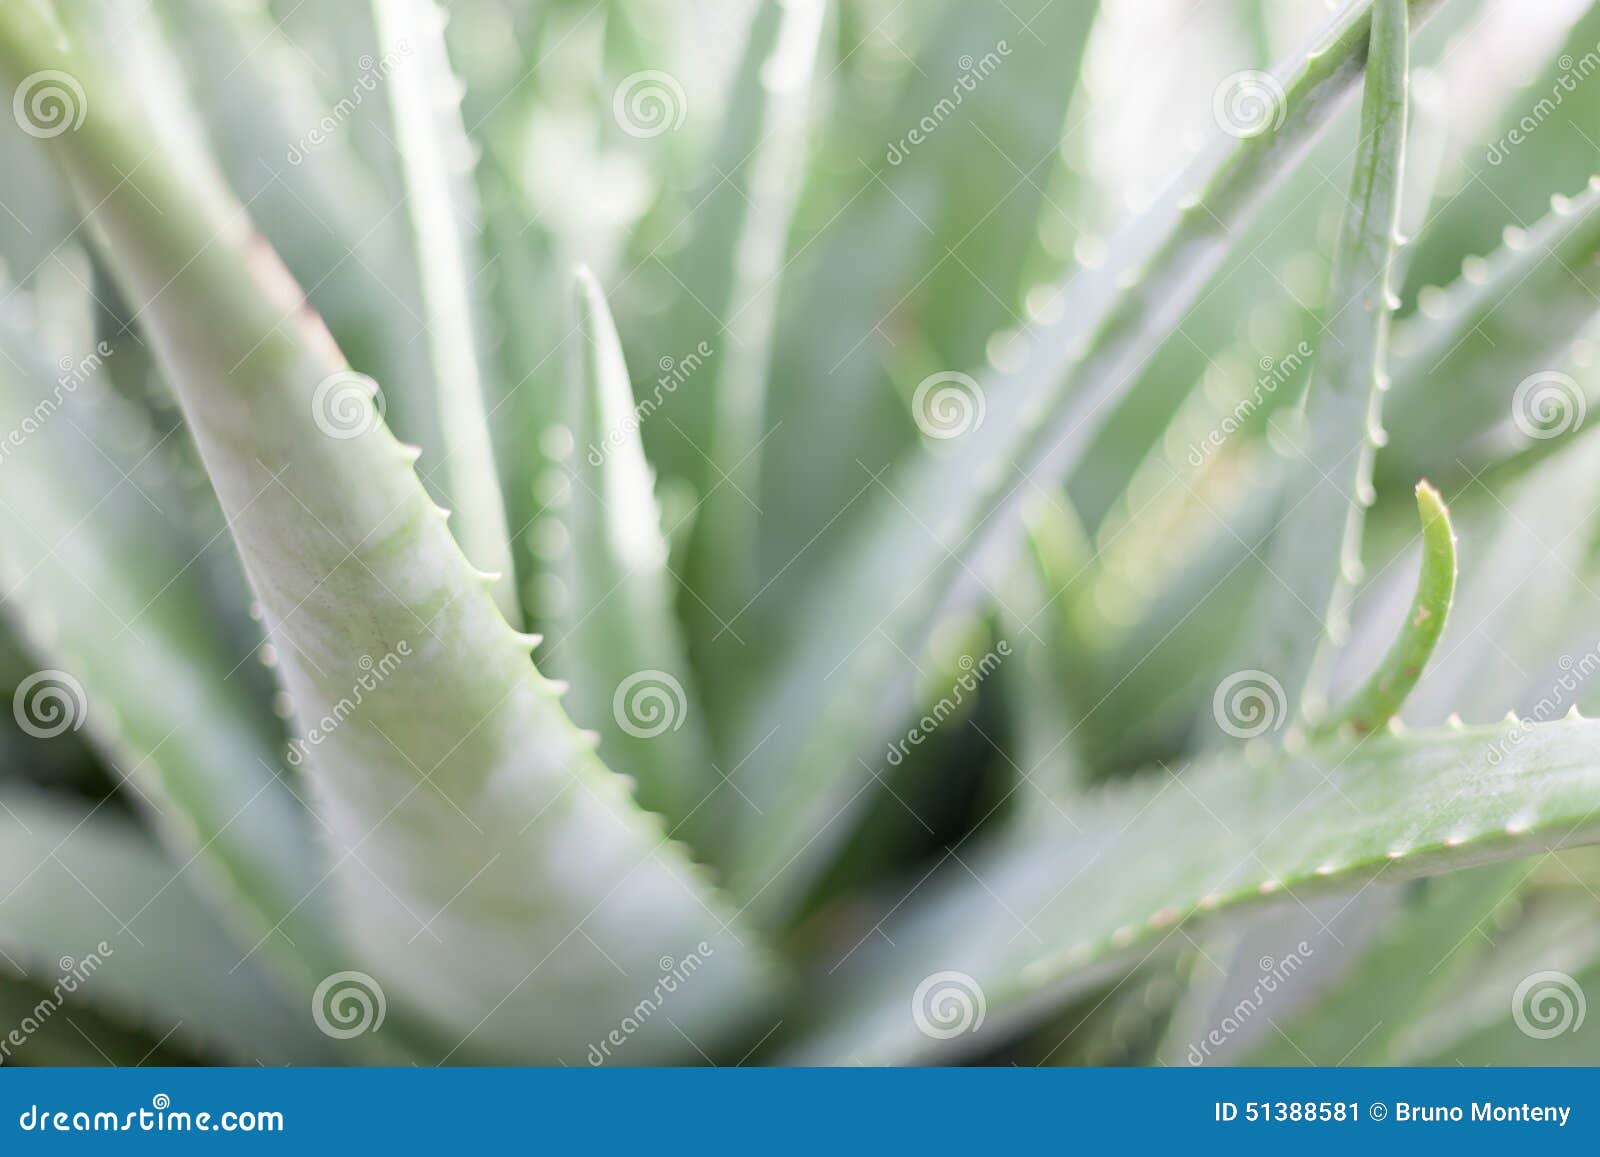 Full Frame Of Aloe Vera Plant In Conservatory Stock Image Image